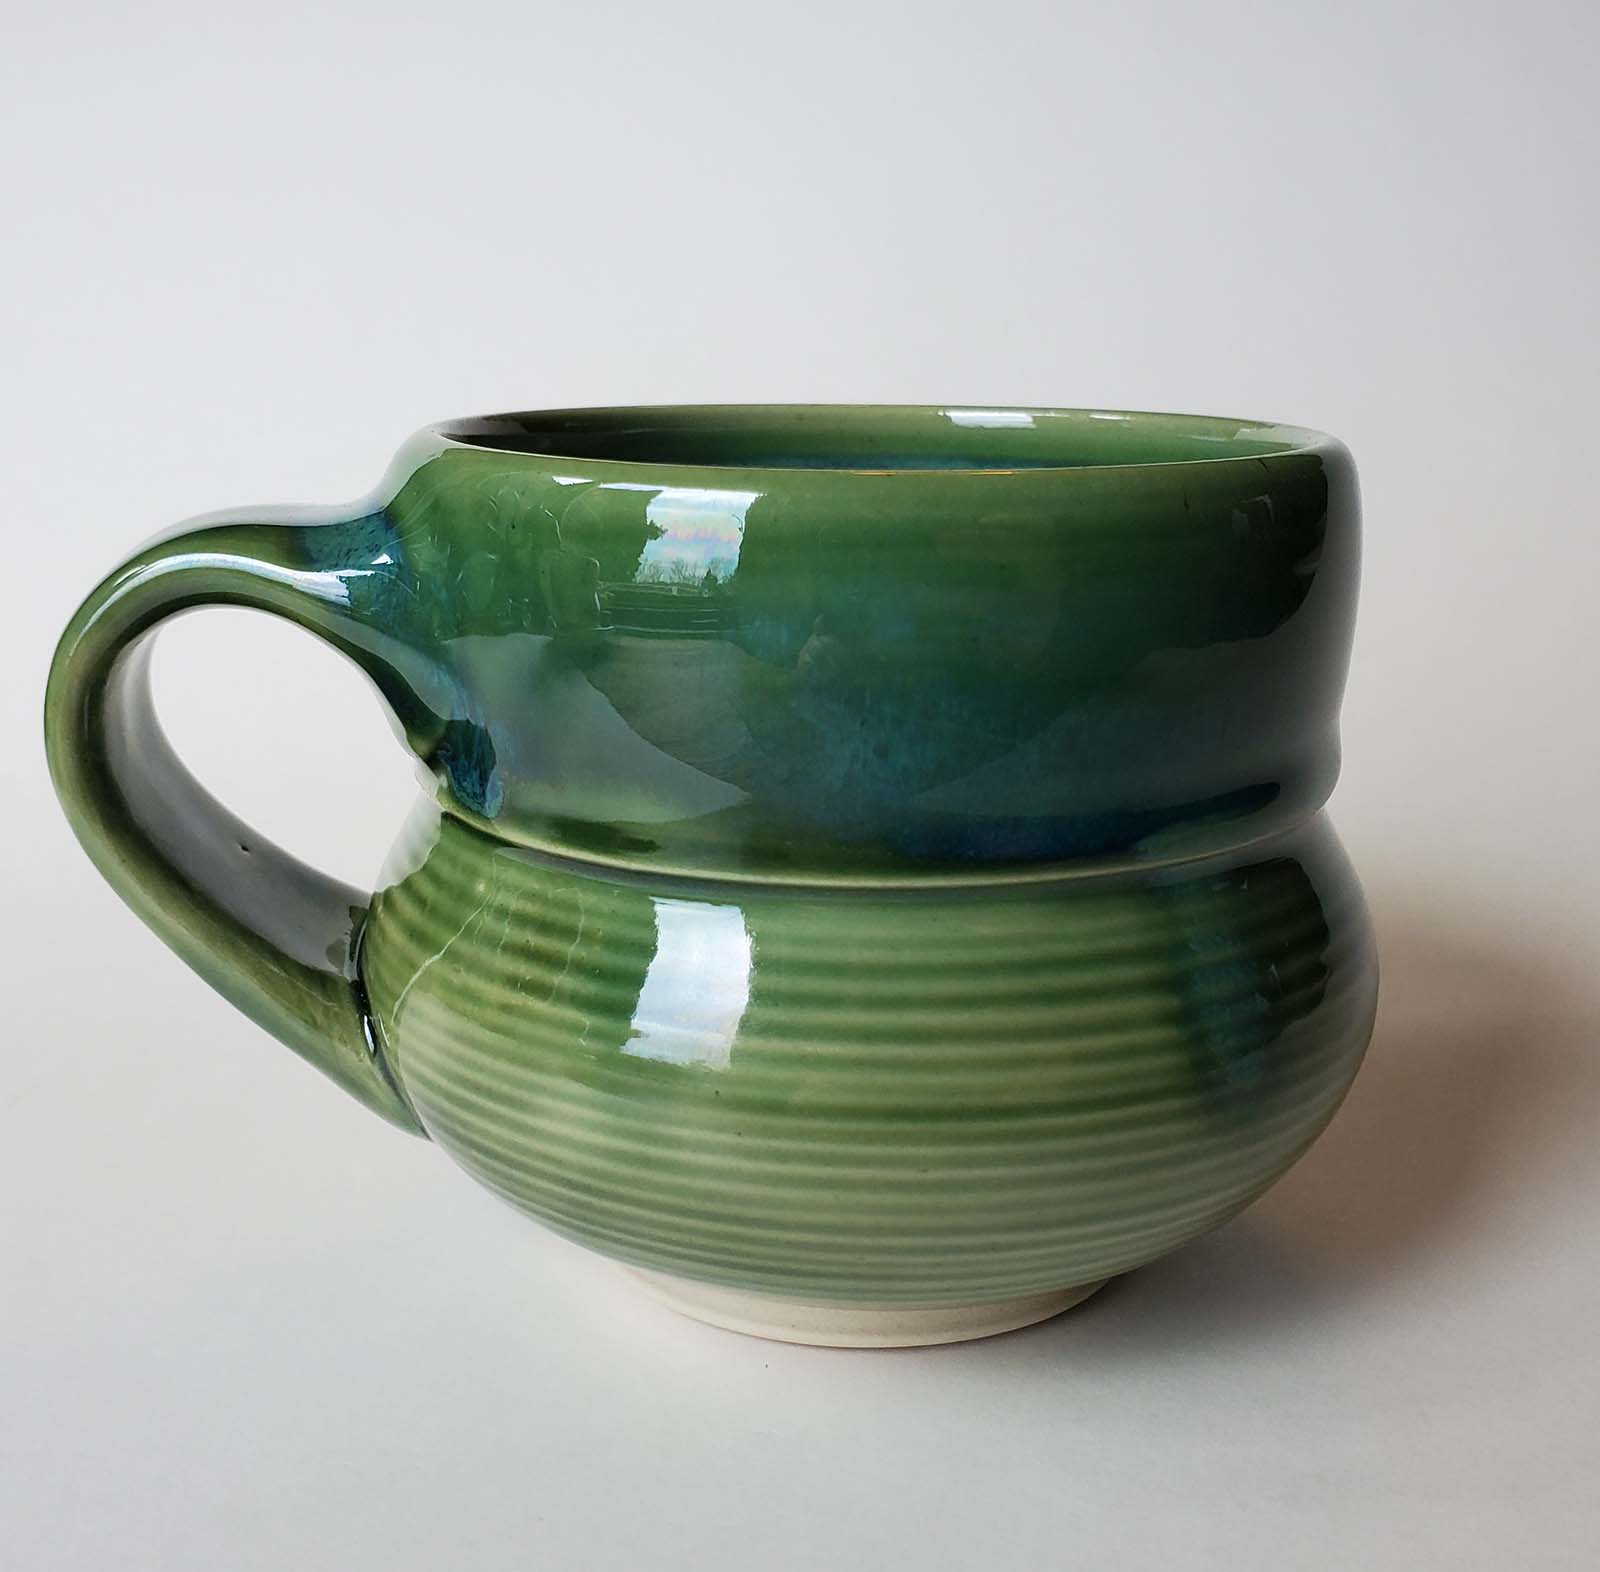 Laura McGraw, mug 3, 4 in. (10 cm) in height, porcelain, clay, glaze, fired to cone 6, 2021.